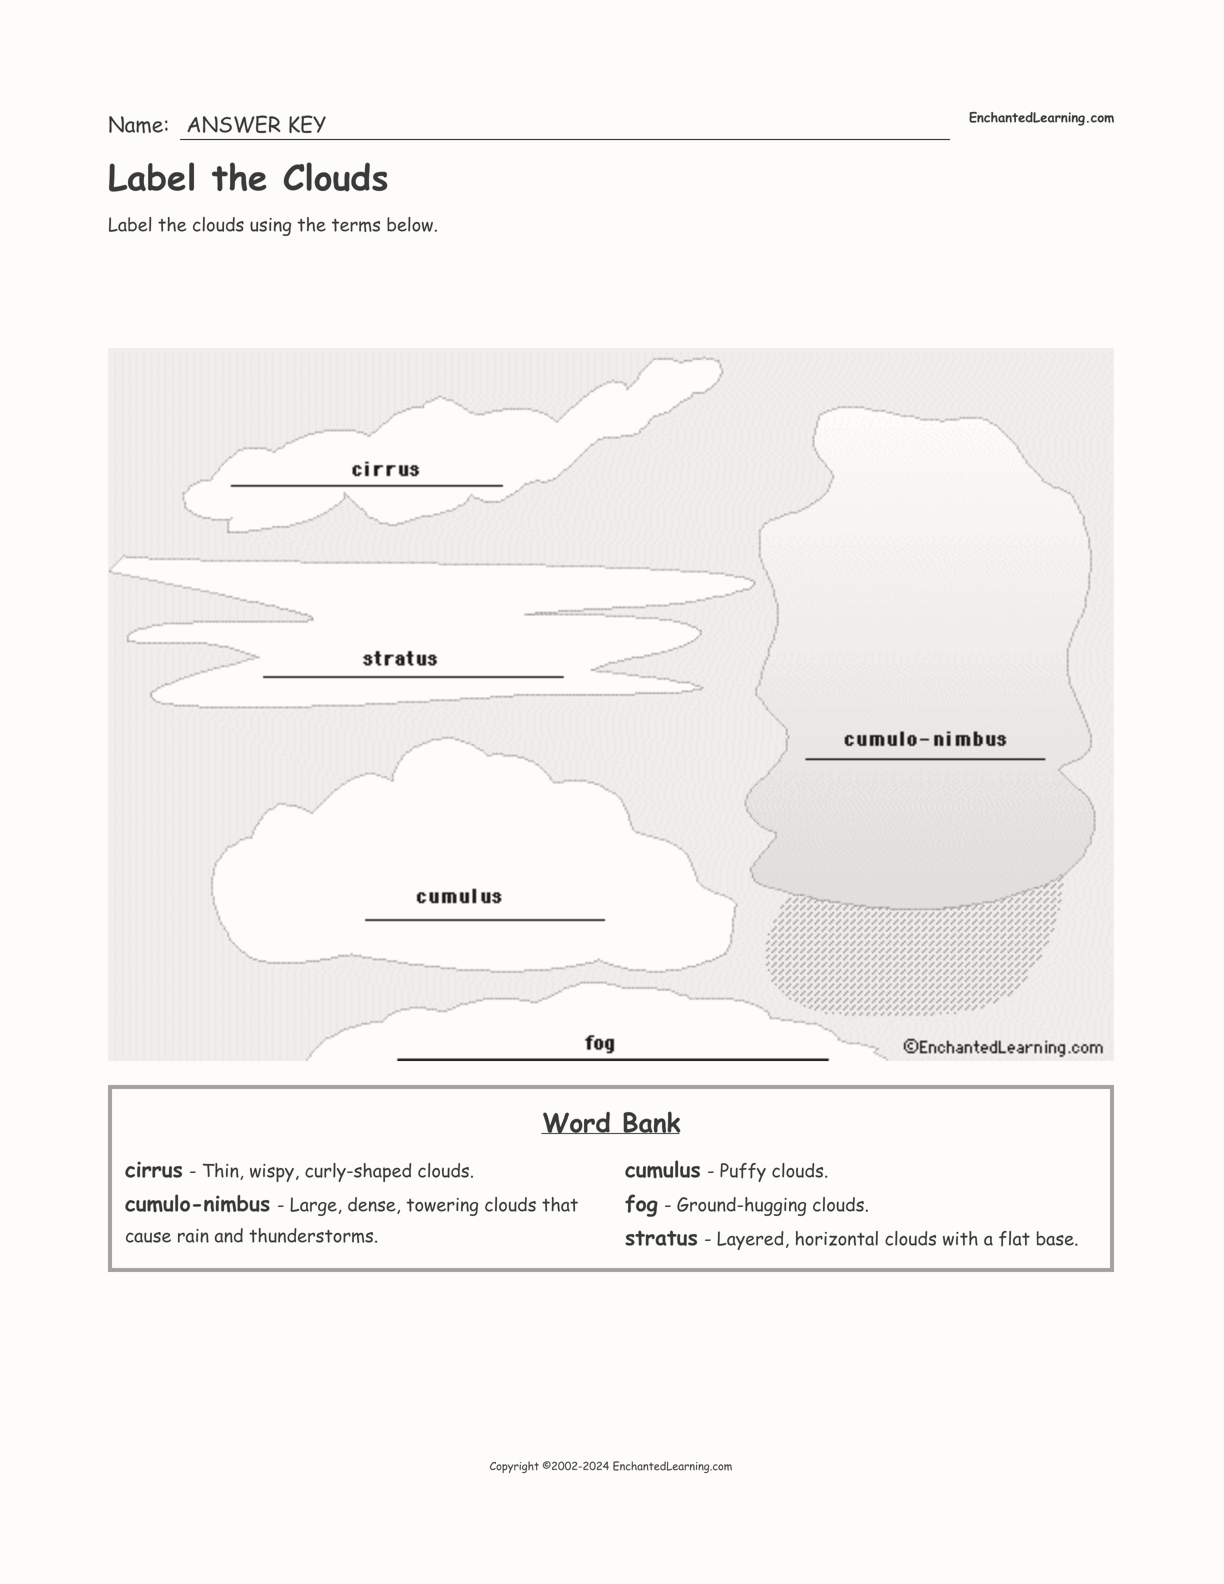 Label the Clouds interactive worksheet page 2